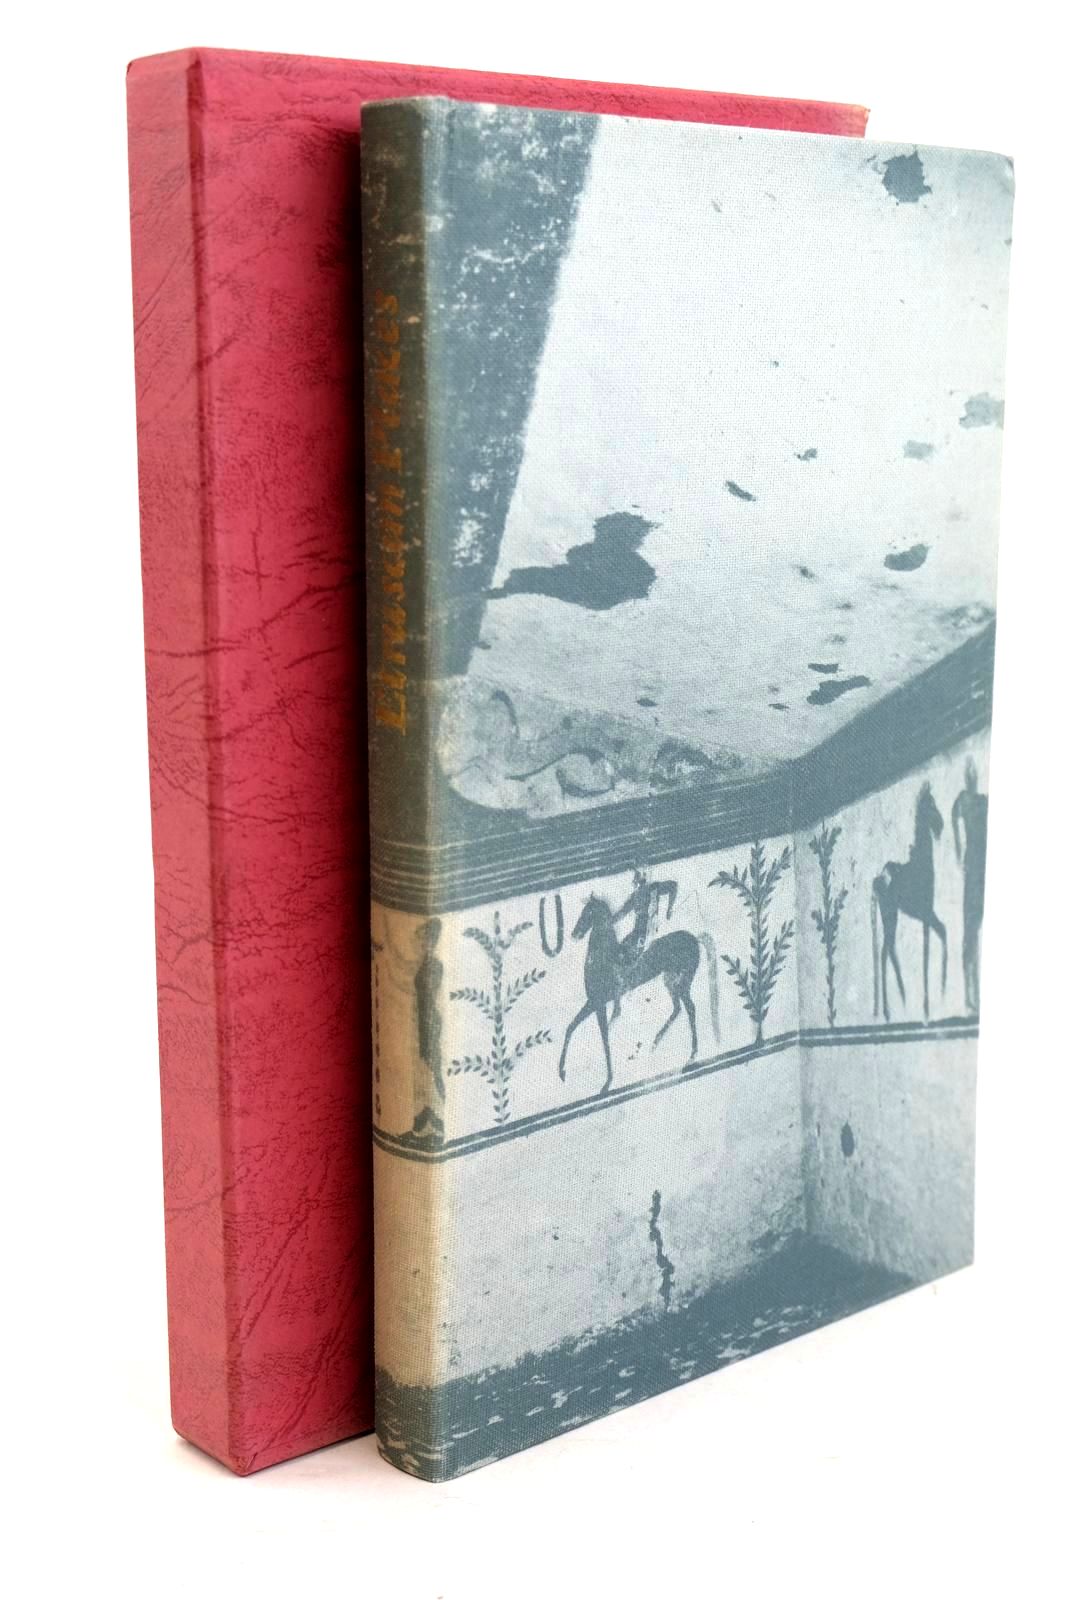 Photo of ETRUSCAN PLACES written by Lawrence, D.H. illustrated by Von Matt, Leonard published by Folio Society (STOCK CODE: 1320579)  for sale by Stella & Rose's Books